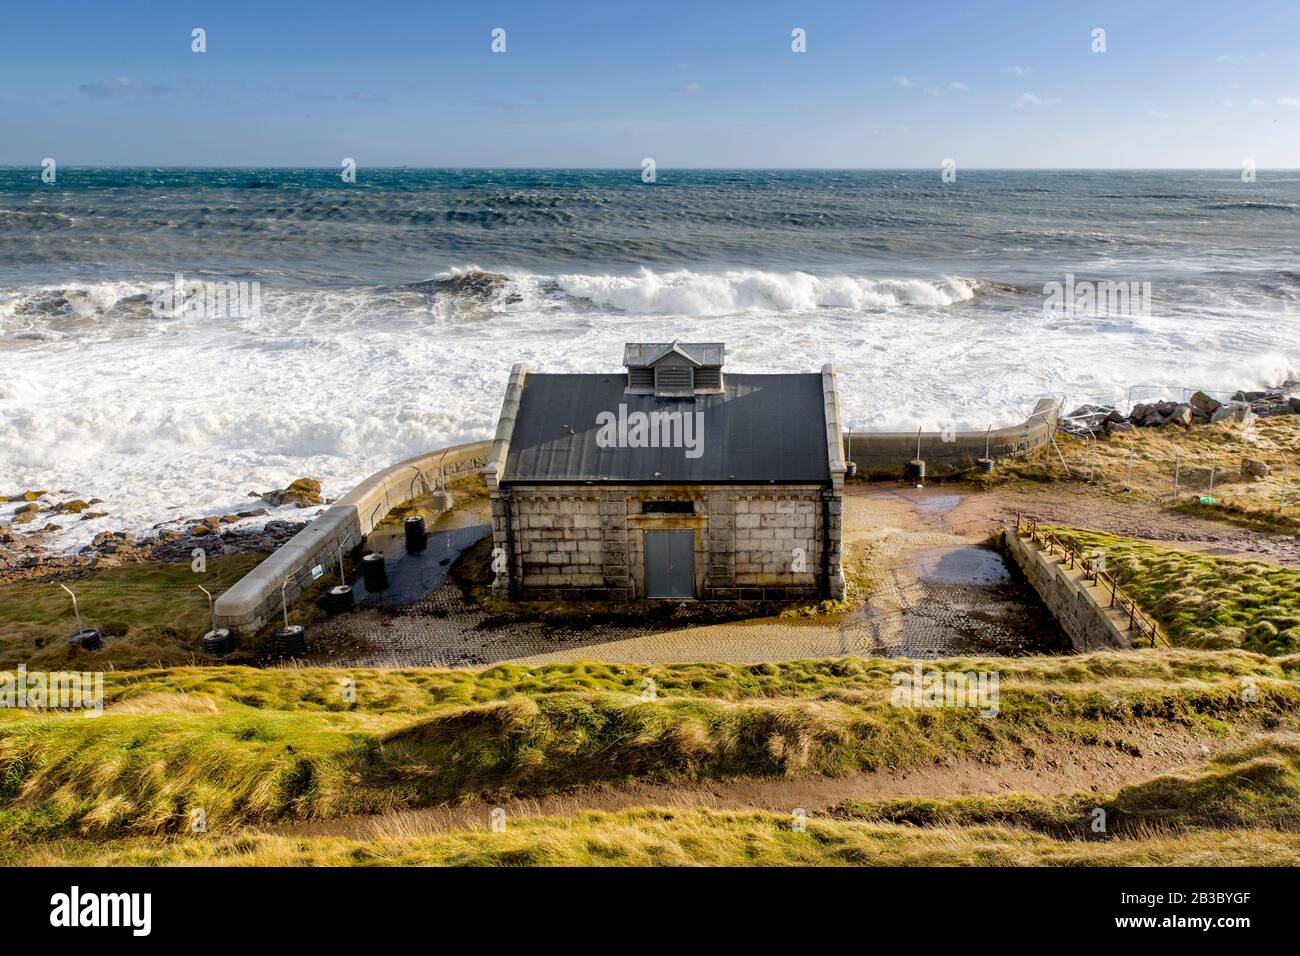 A small building by the sea, below Aberdeen Lighthouse Girdle Ness and its fog horn, rough sea waves Stock Photo